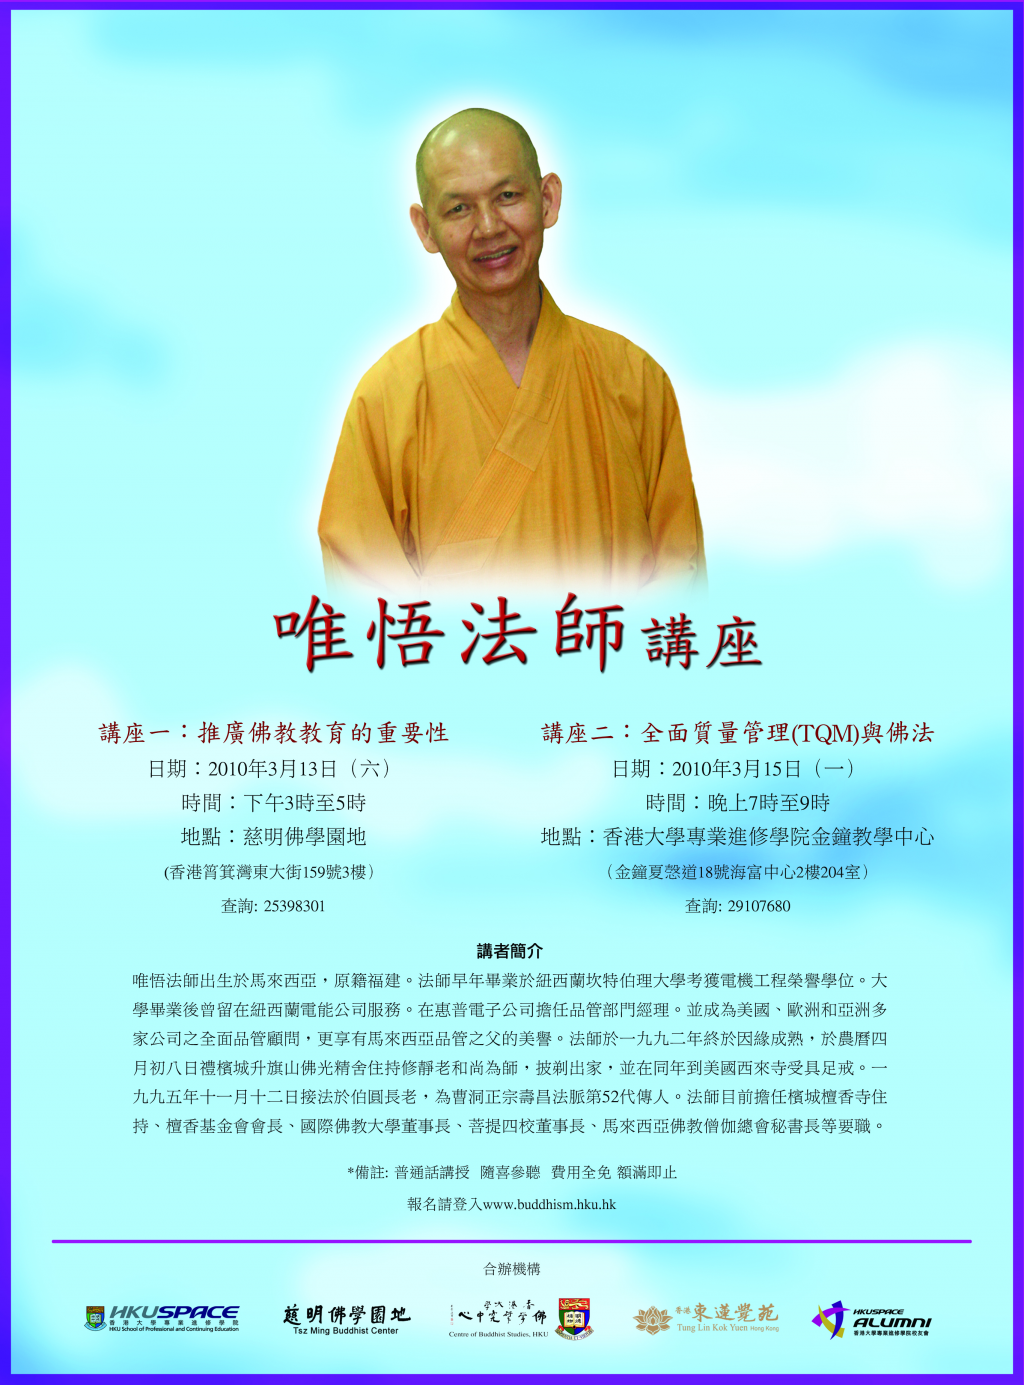 TLKY Buddhist Academic Lecture Series